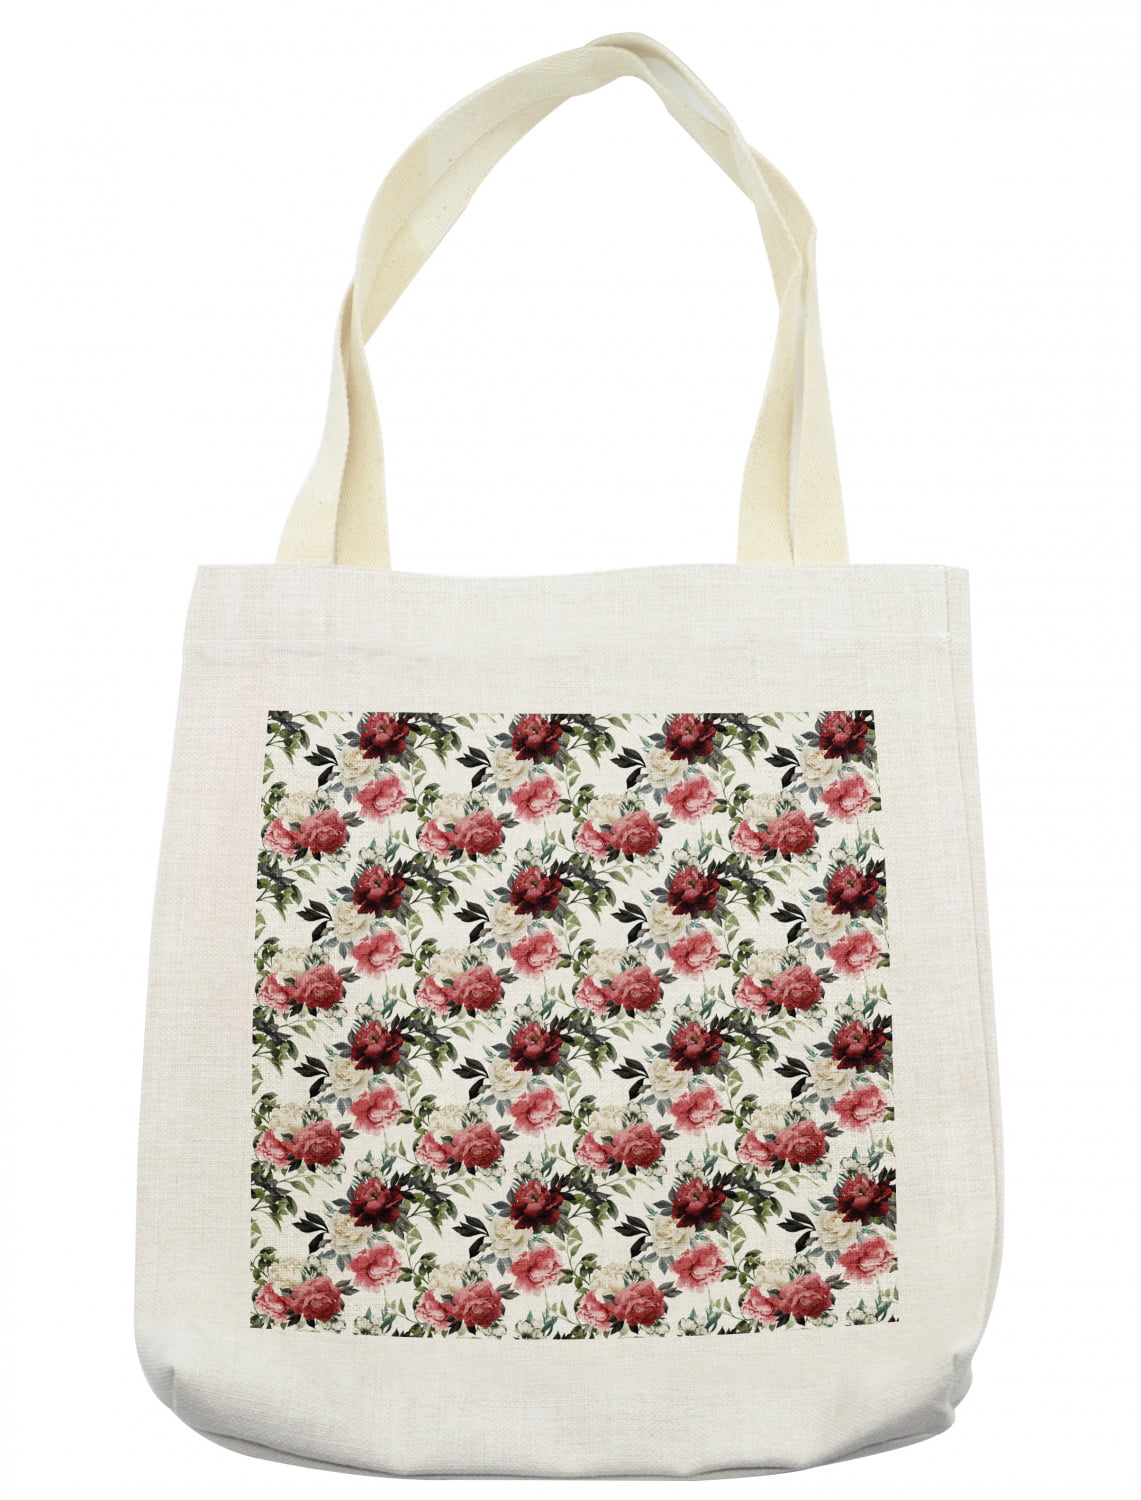 Shabby Flora Tote Bag, Floral Flower Roses Buds with Leaves and ...